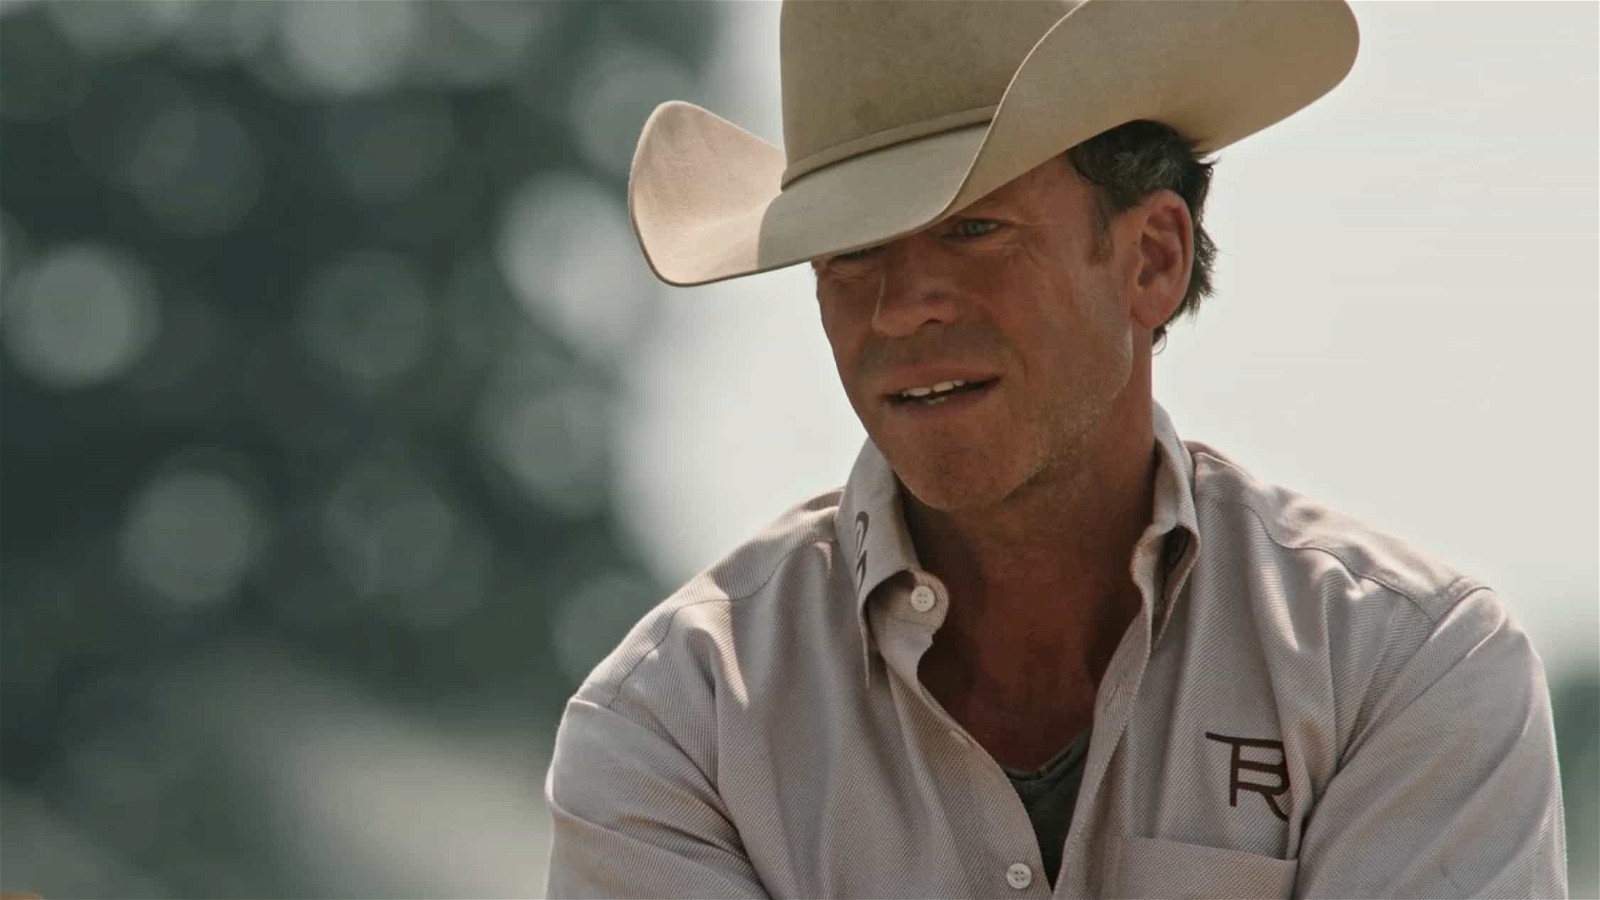 In addition to being the creator of Yellowstone, Taylor Sheridan starred as Travis Wheatley in the show